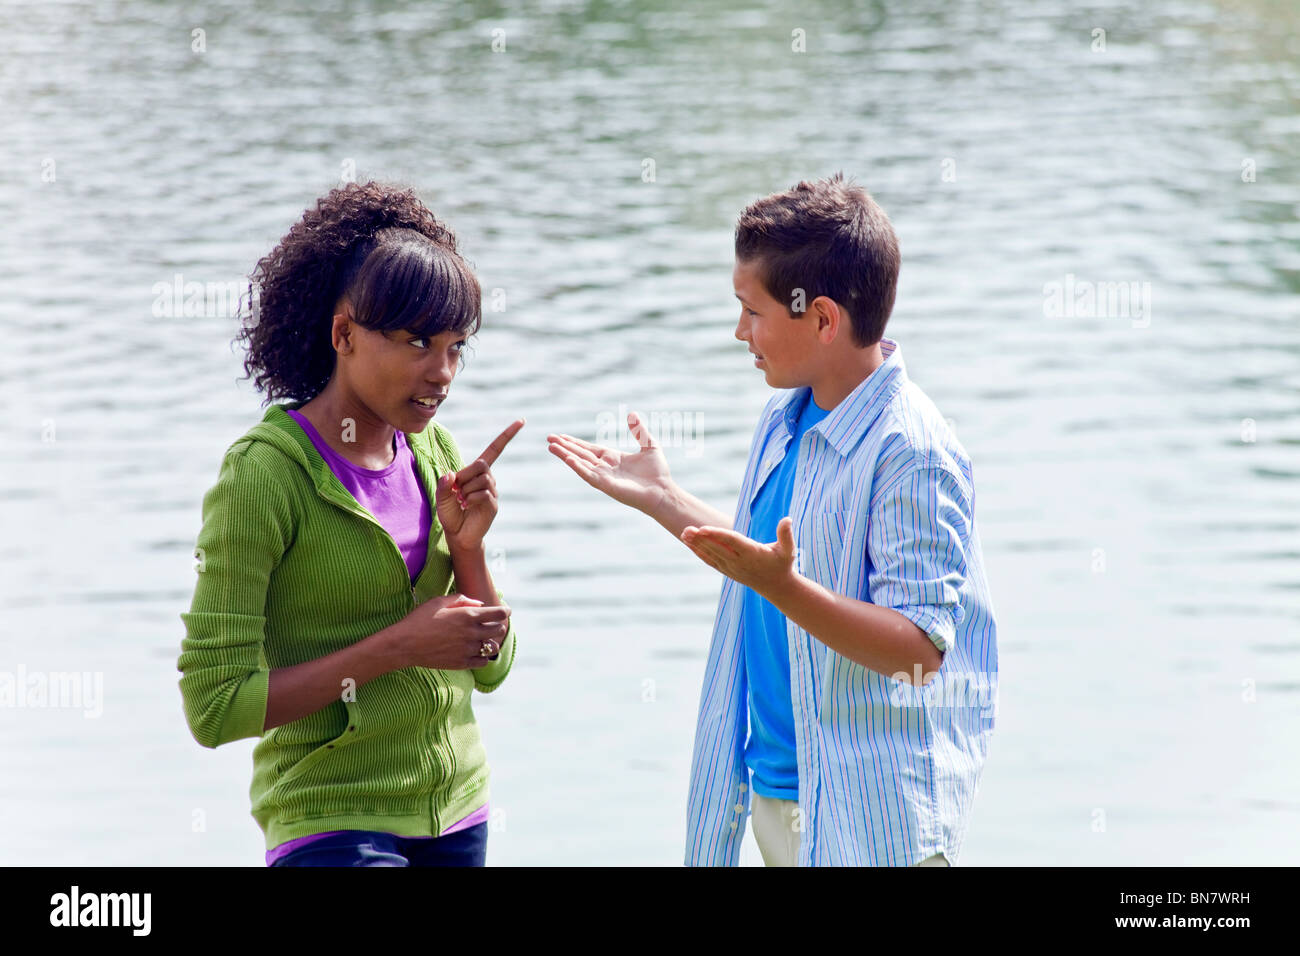 14 15 16 year years old Multi ethnic racial Ethnically diverse teenagers African American Caucasian talking enthusiastic conversation MR ©Myrleen Pearson Stock Photo